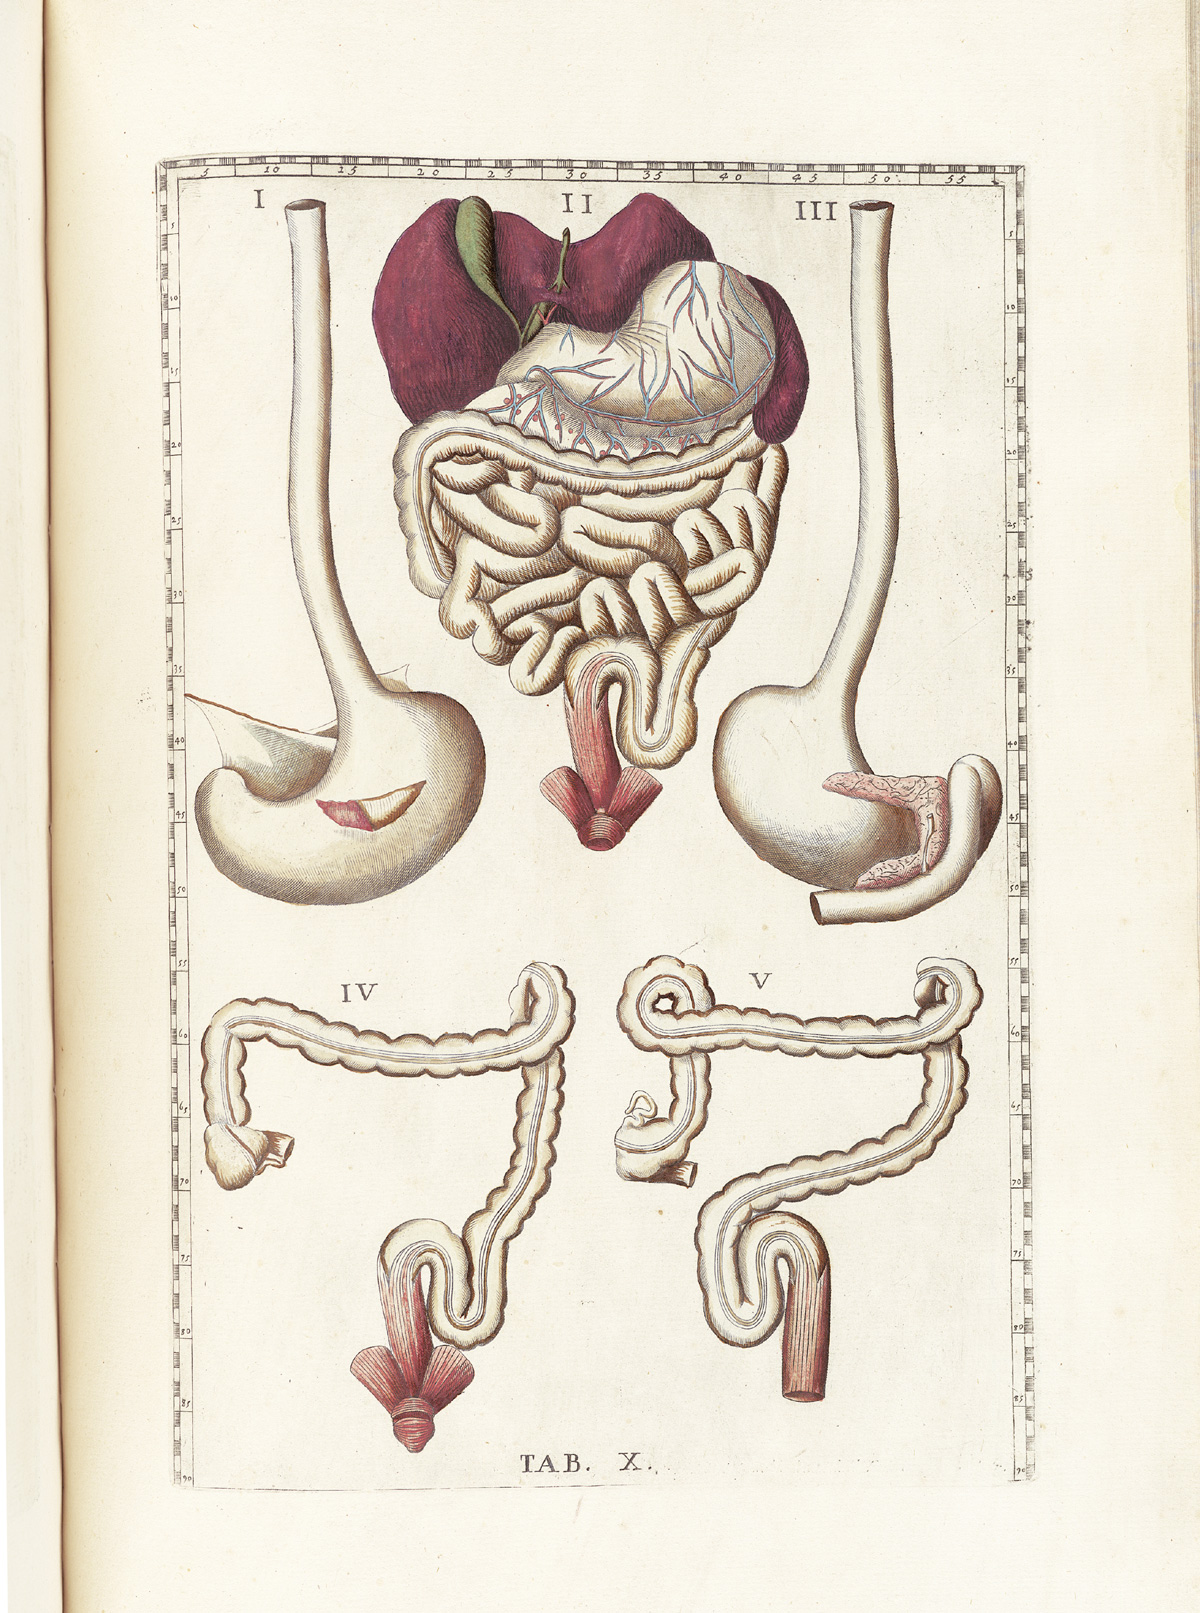 Hand-colored etching of the digestive organs with the liver, stomach, large and small intestines grouped together at the top of the page, with two views of the esophagus and stomach to the right and left and two views of the large intestine at the bottom of the page; from Bartholomeo Eustachi’s Tabulae anatomicae, NLM Call no.: WZ 260 E87t 1783.